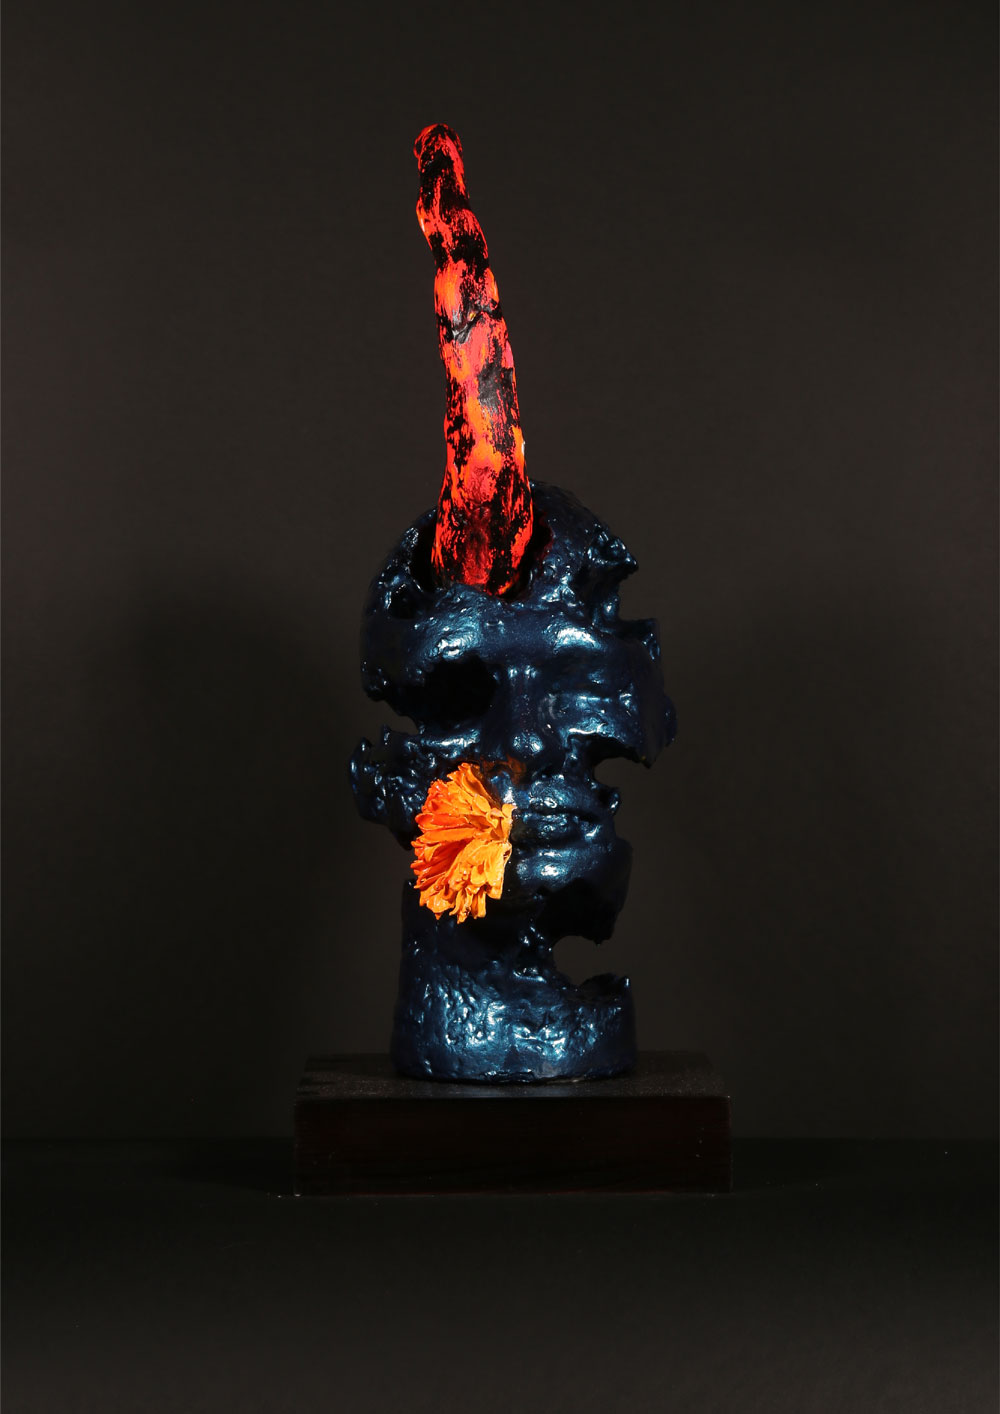 UNTITLED II sculpture by Maher Diab